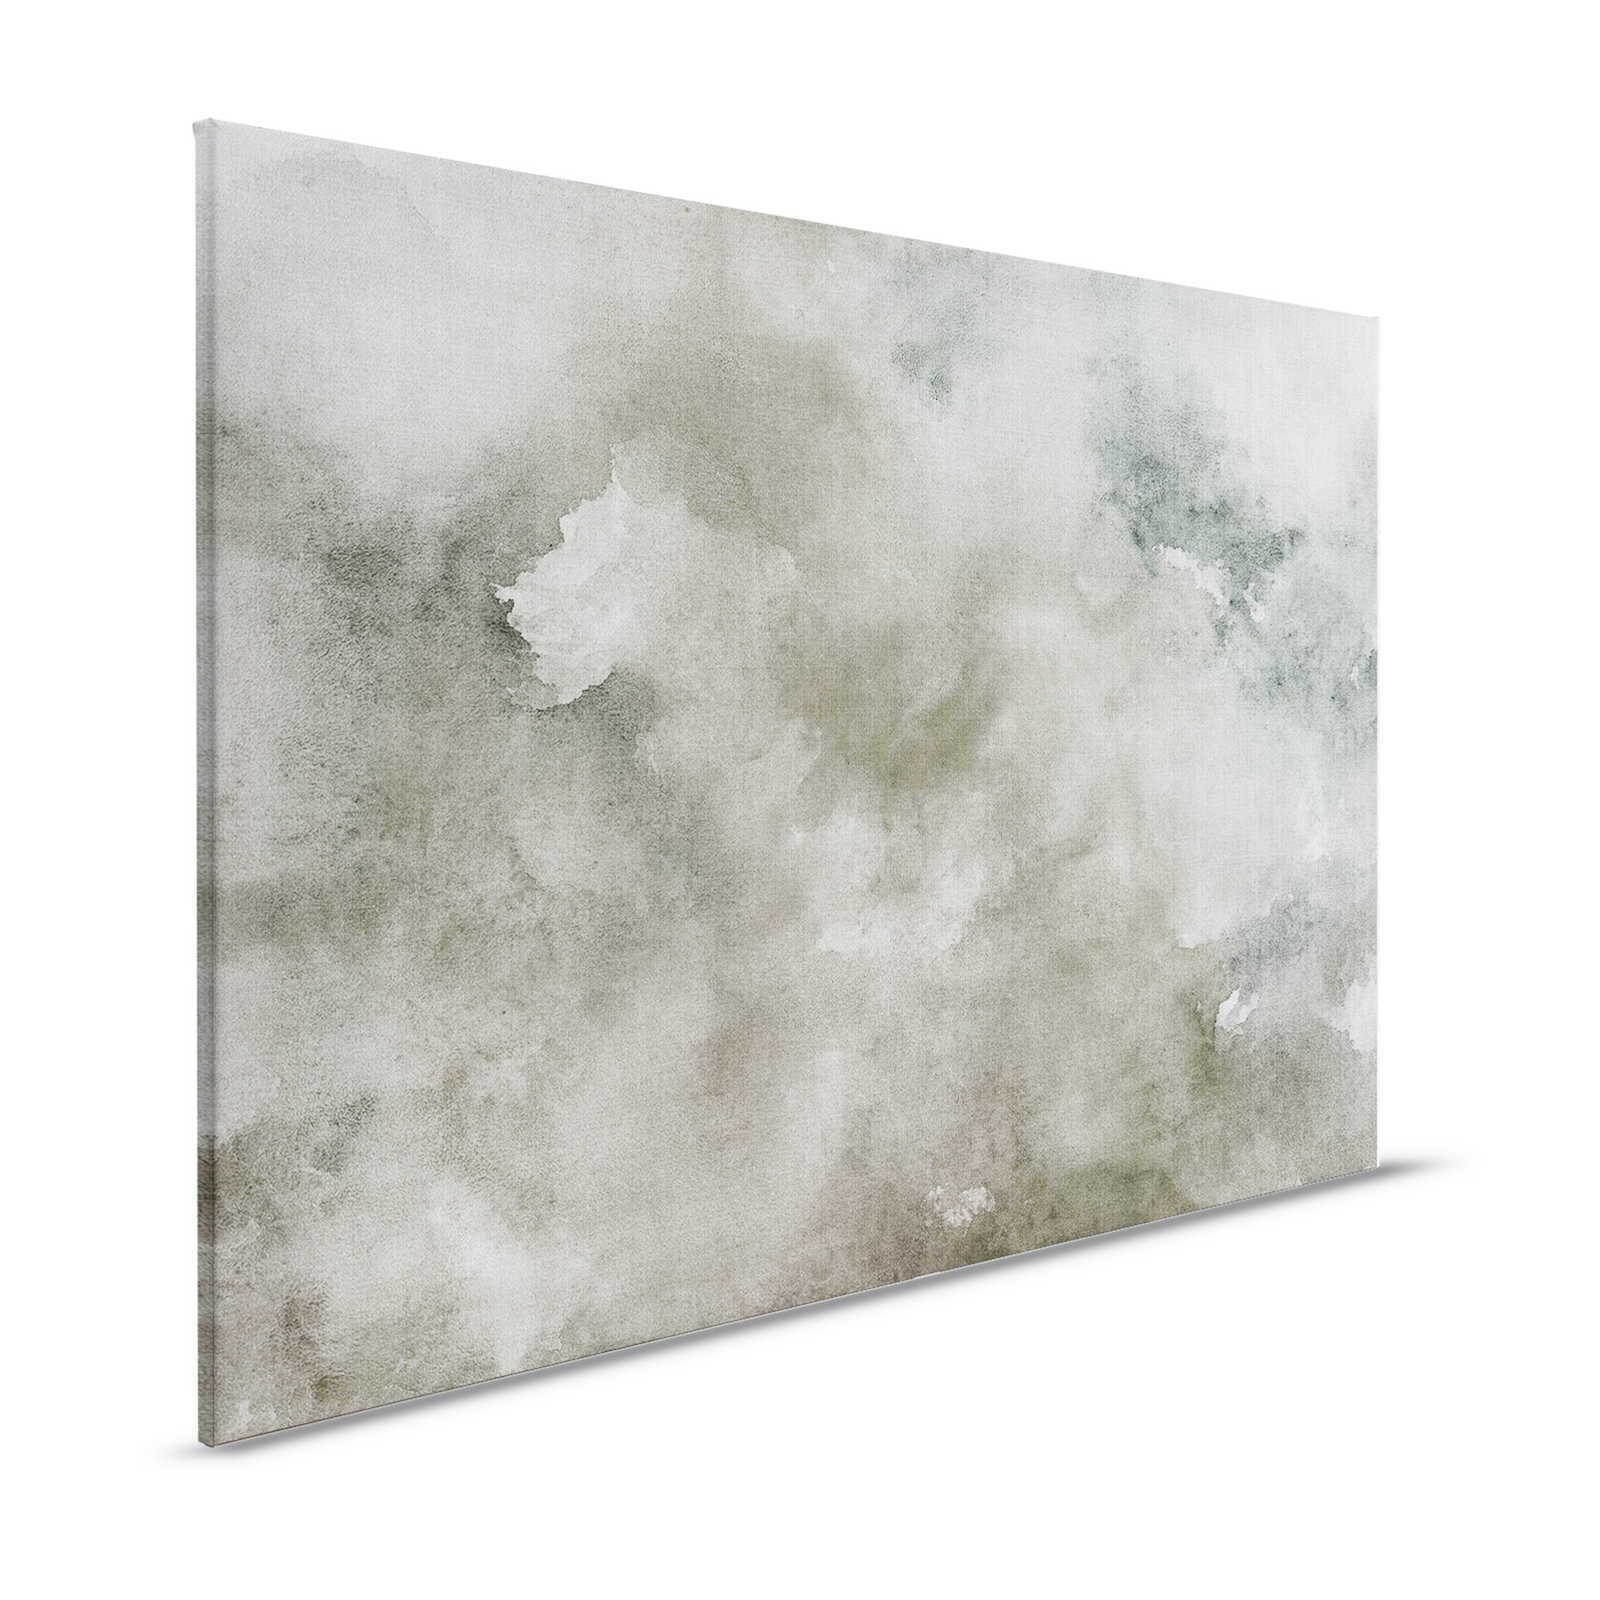 Watercolours 1 - Grey watercolour canvas painting in natural linen look - 1.20 m x 0.80 m
